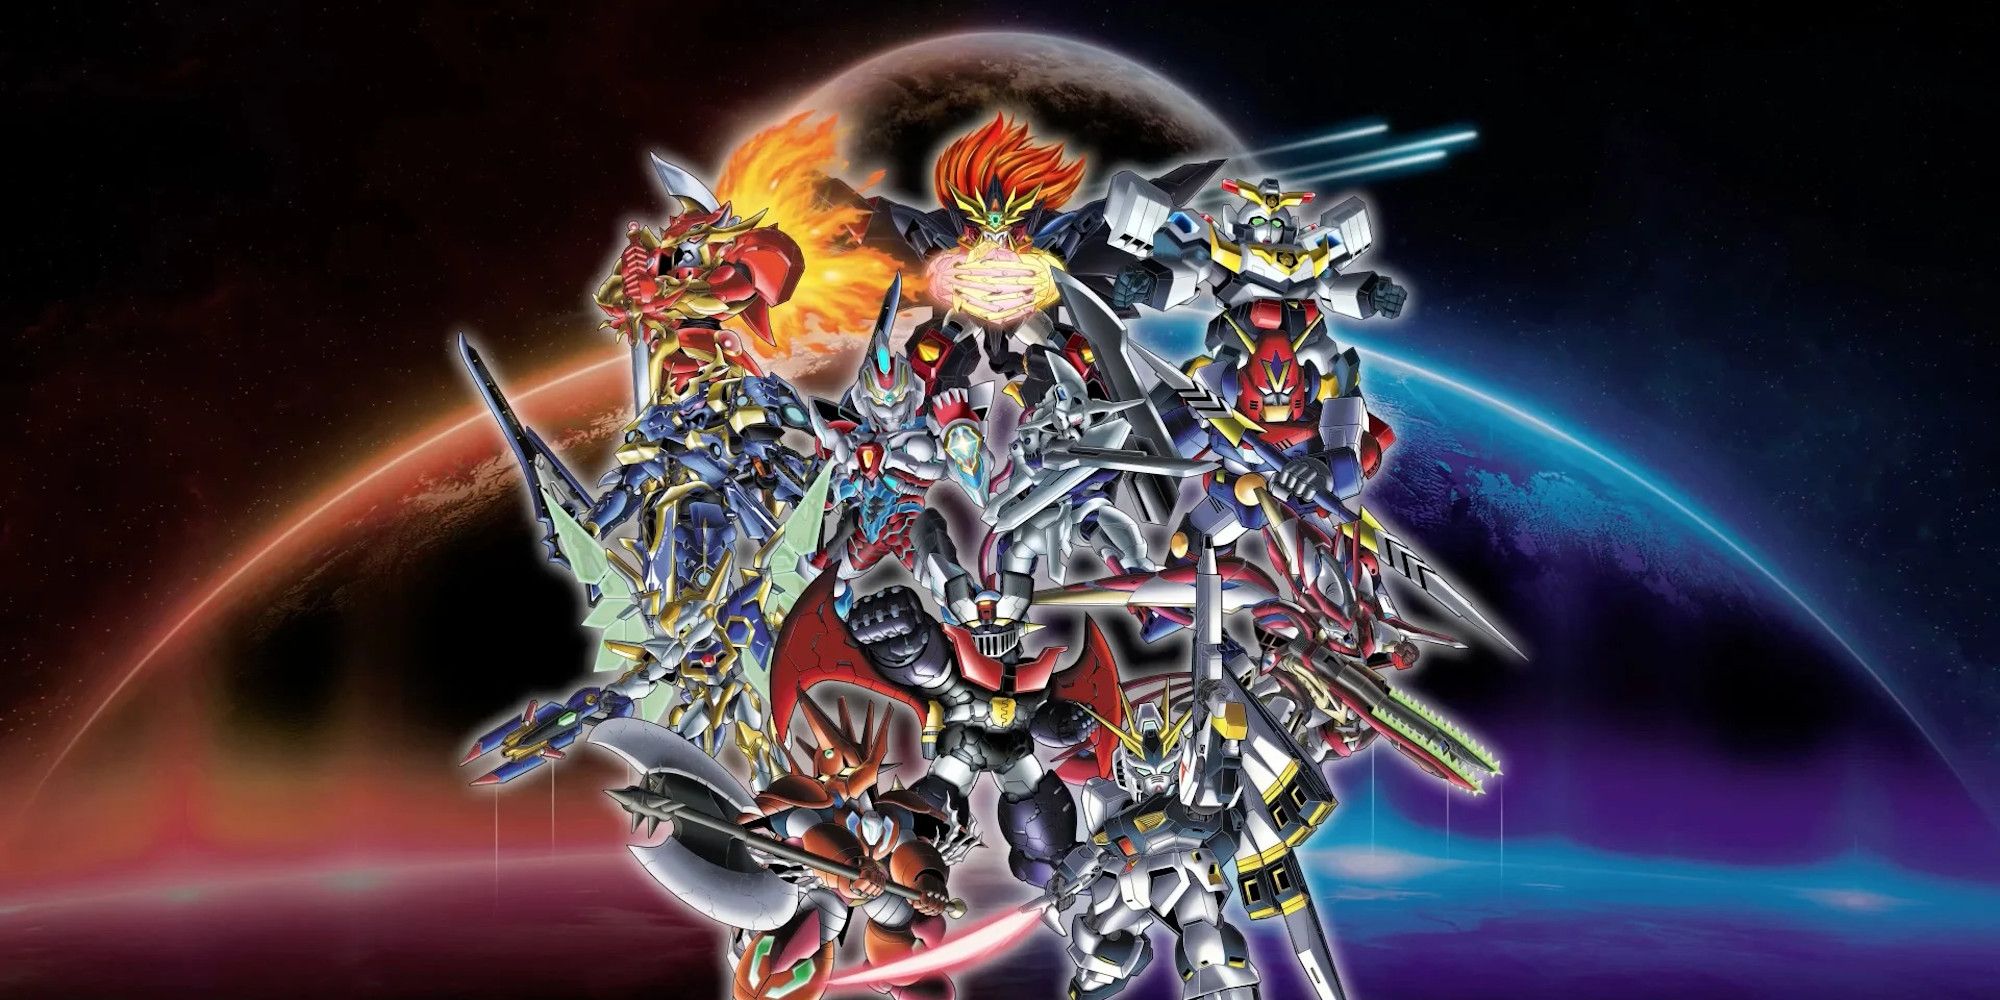 Super Robot Wars Finally Gets A North American And European Release